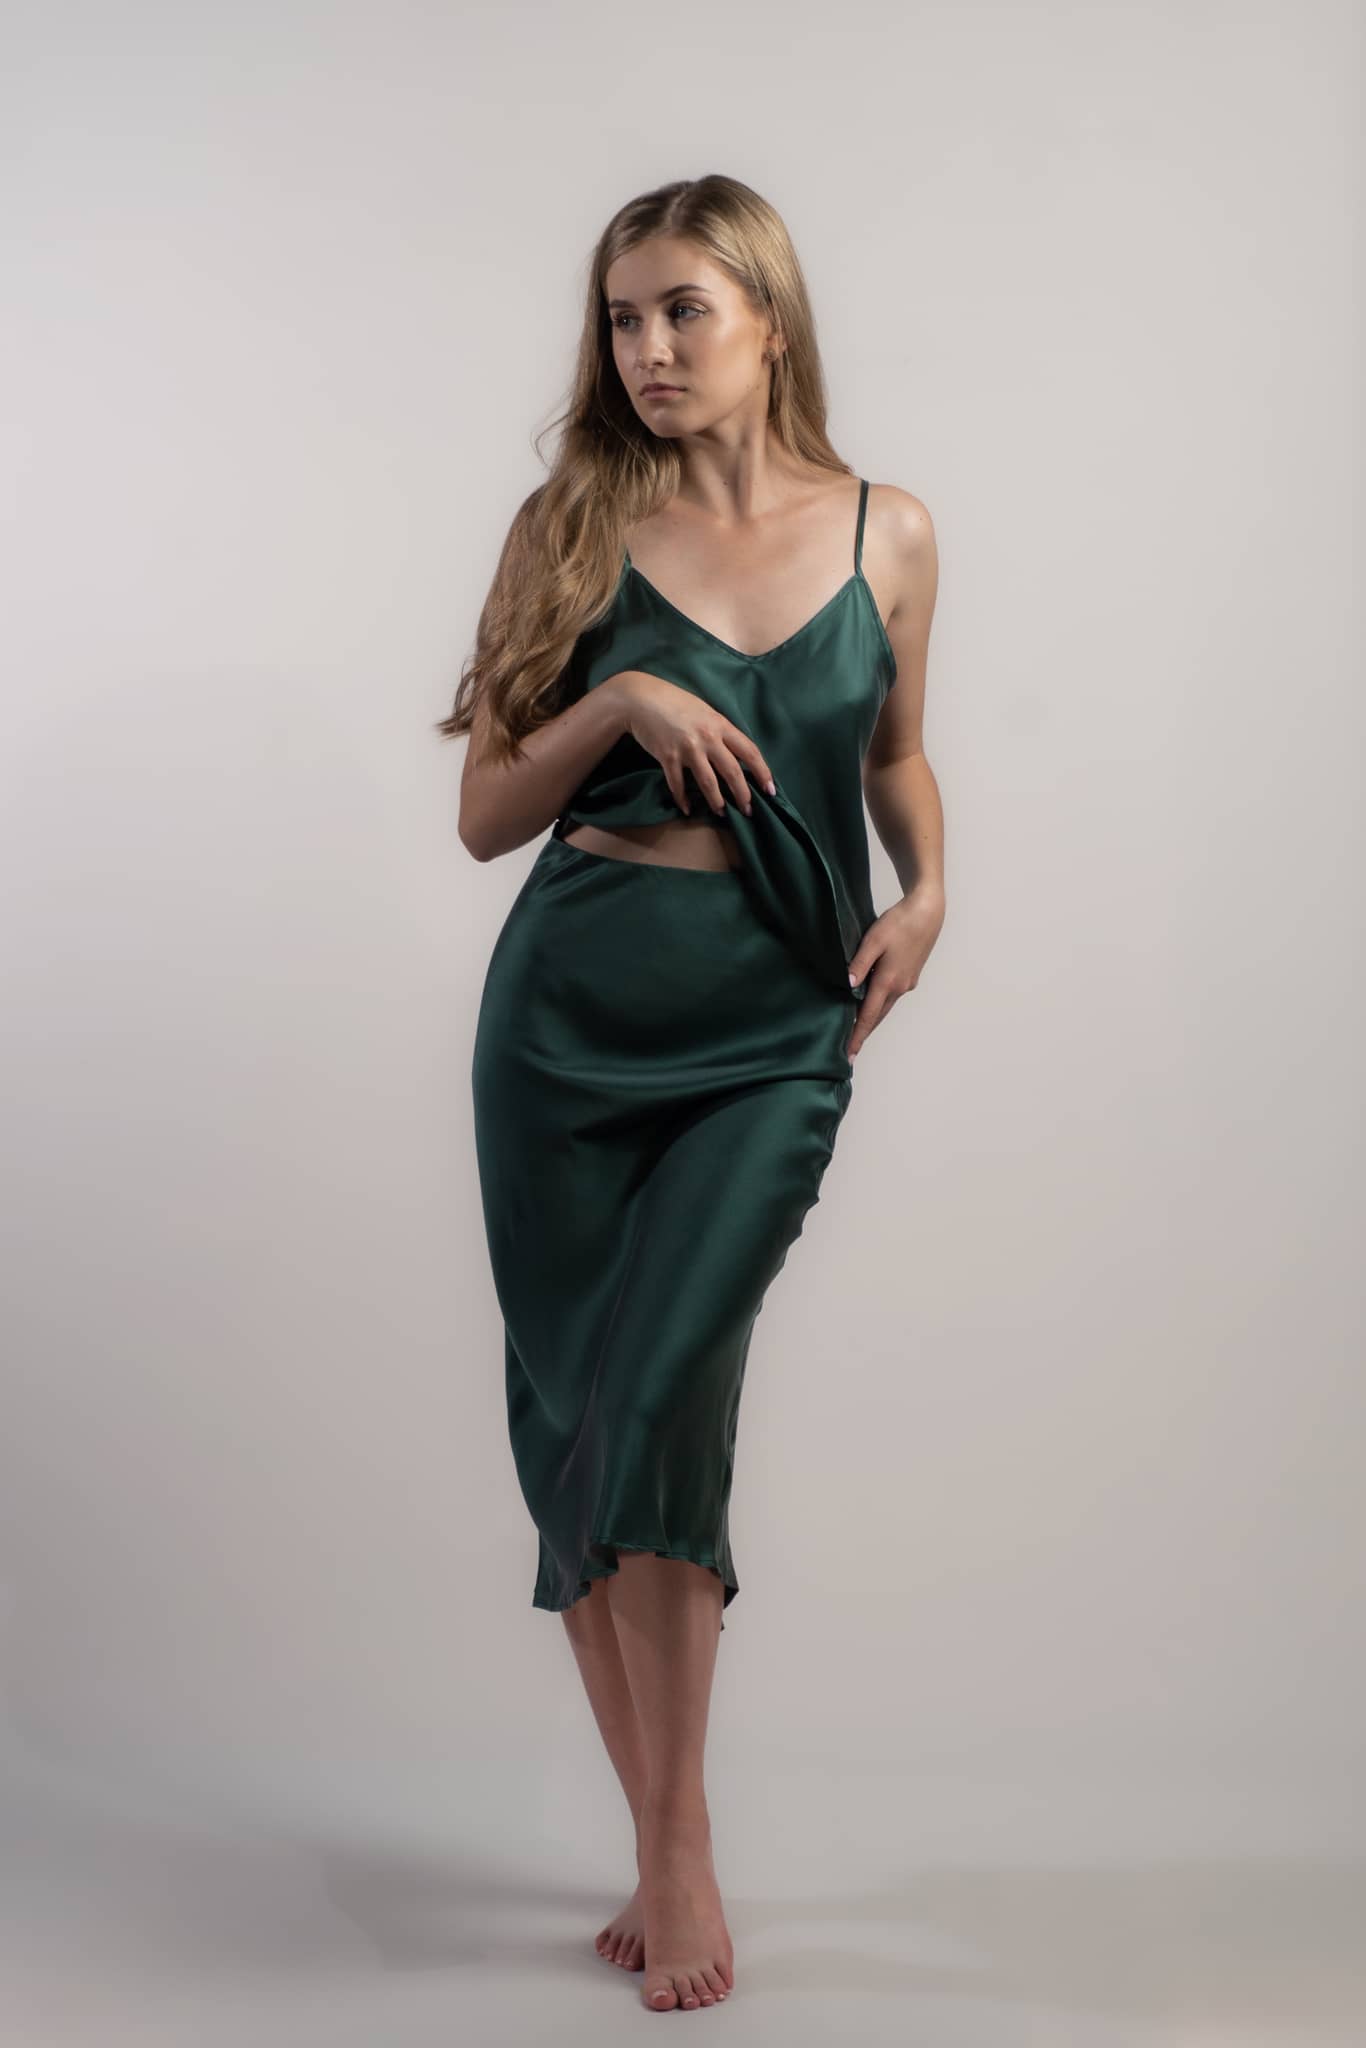 Woman wearing silk closet green skirt and camisole top. Perfect for evenings.